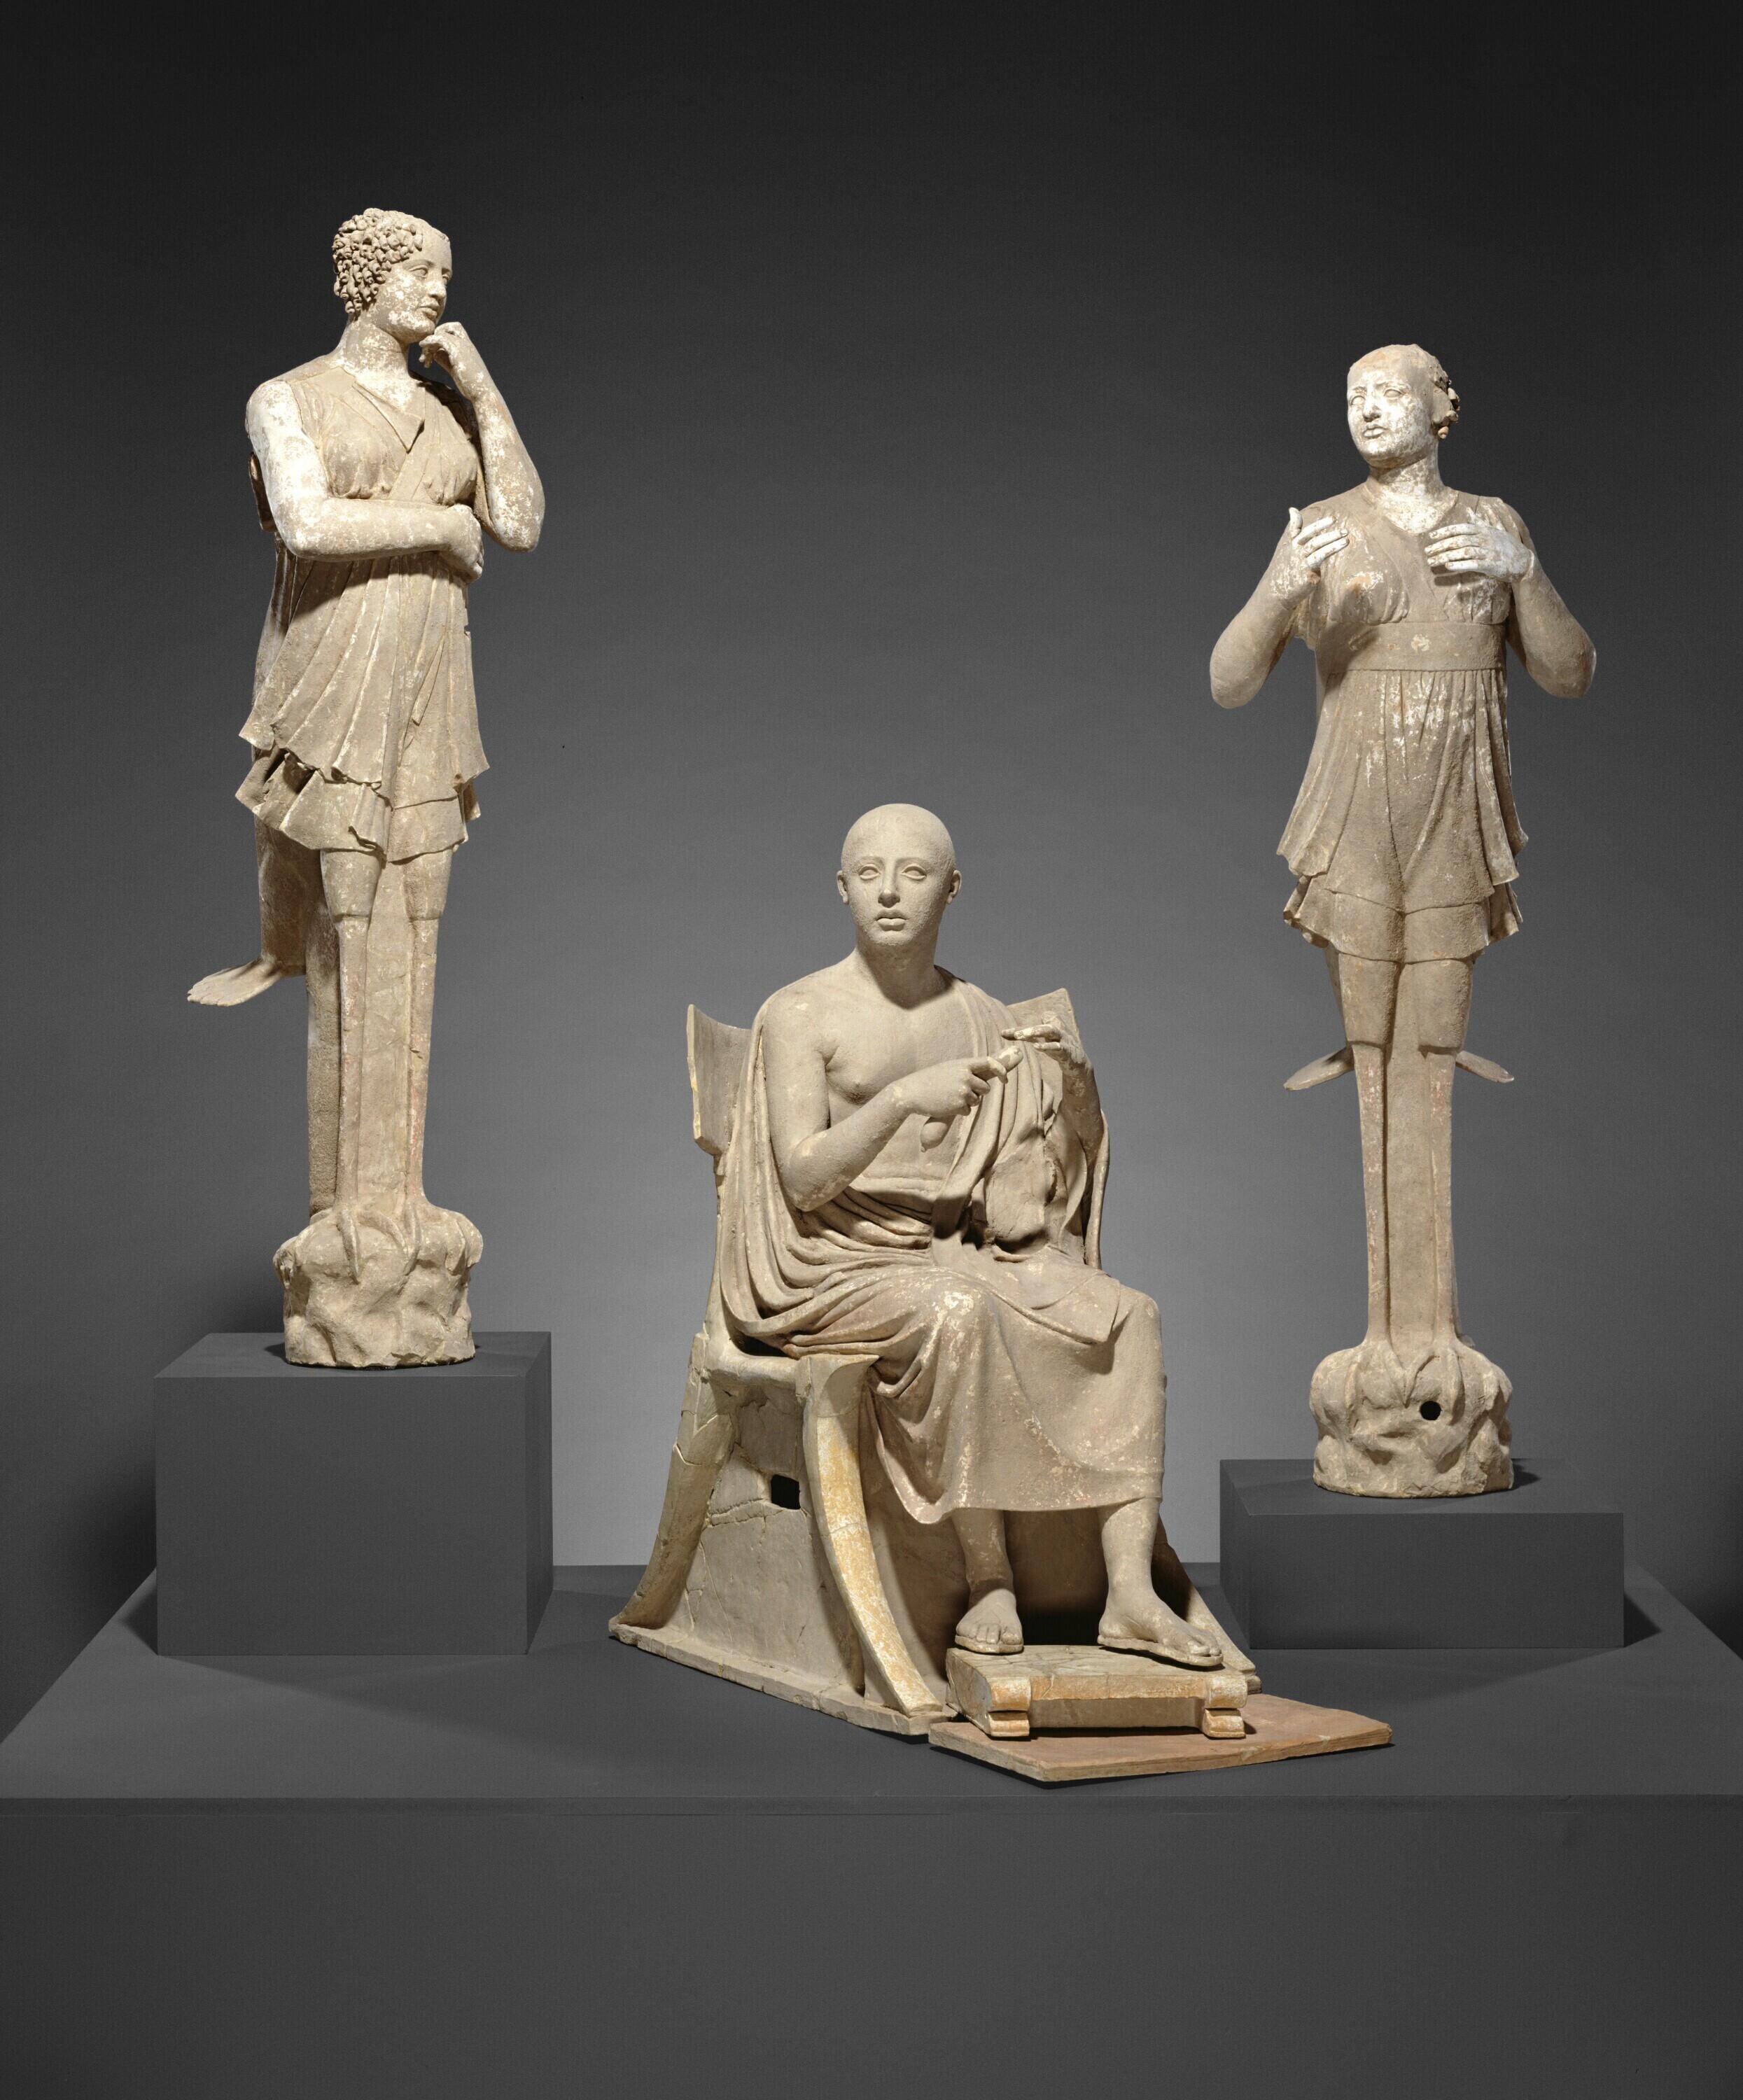 This photo shows a group of three nearly life-size statues known as Orpheus and the Sirens